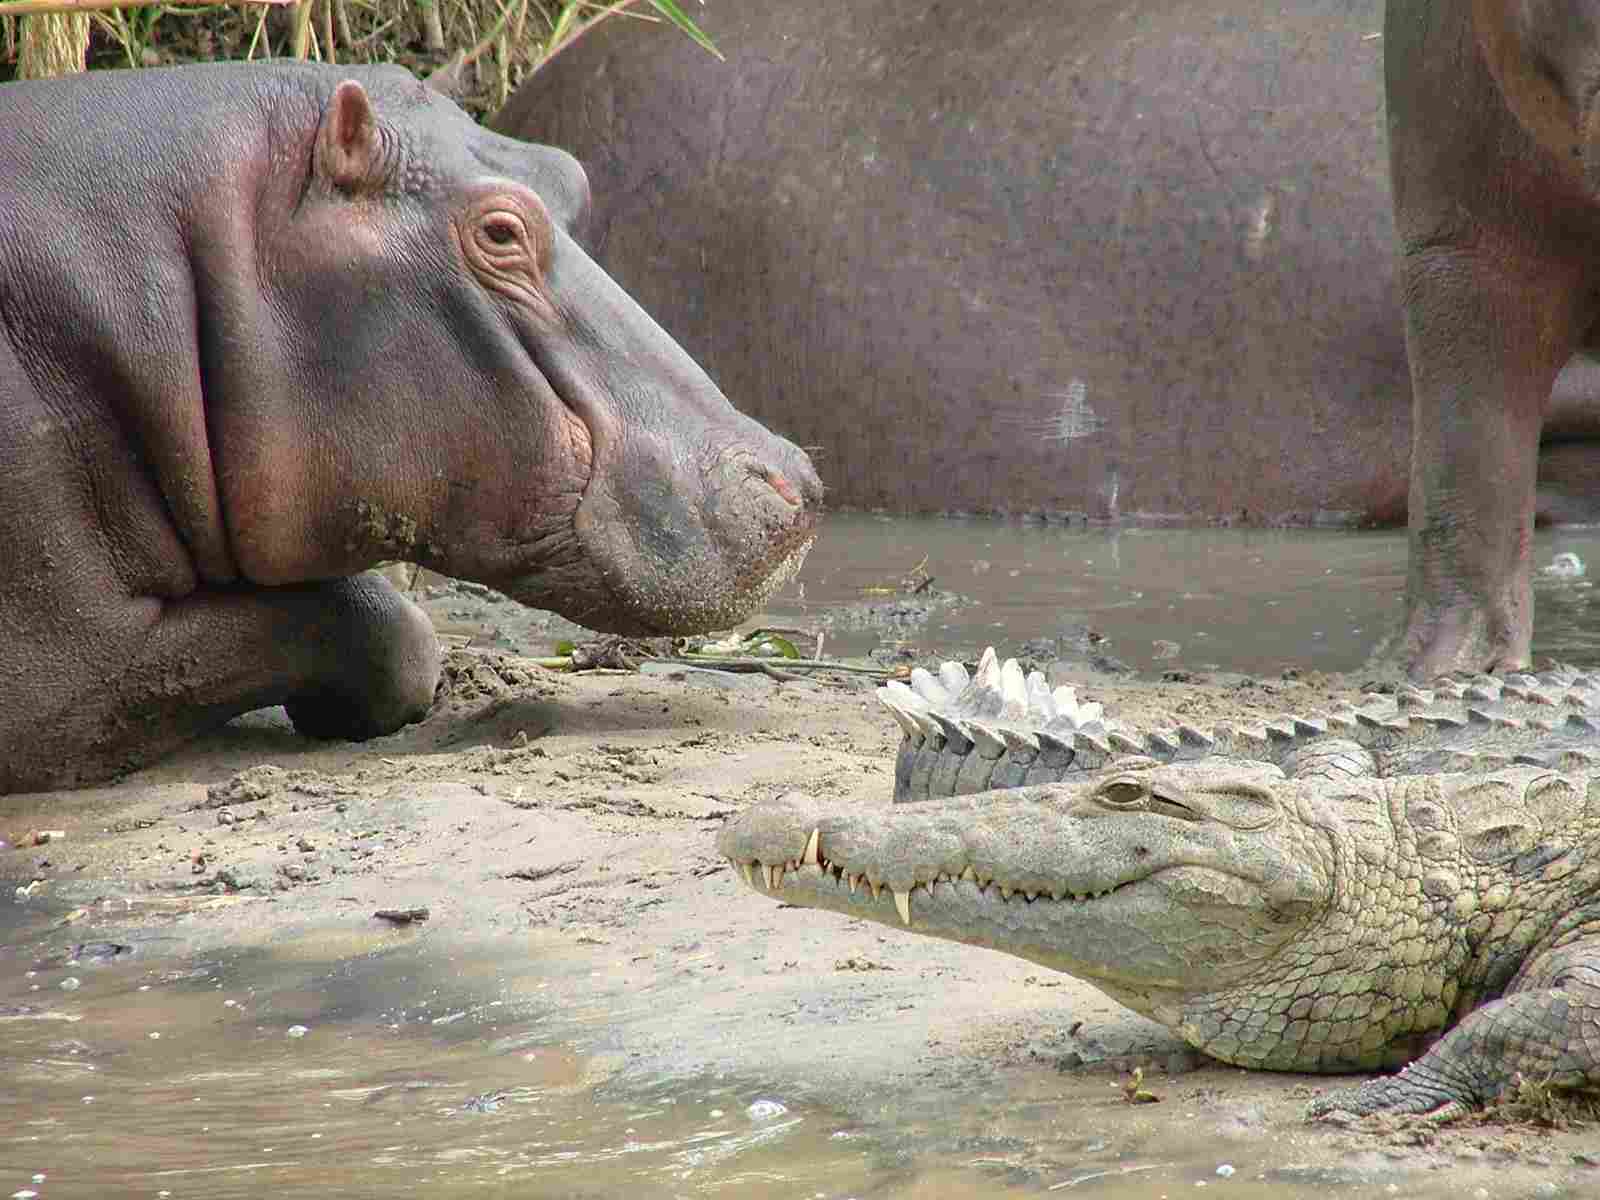 Hippo Vs Crocodile: While Crocodiles are Formidable, Hippos are Larger, Heavier, and have Larger Mouths (Credit: Paul Williams 2005, Uploaded Online 2006 .CC BY-SA 2.0.)